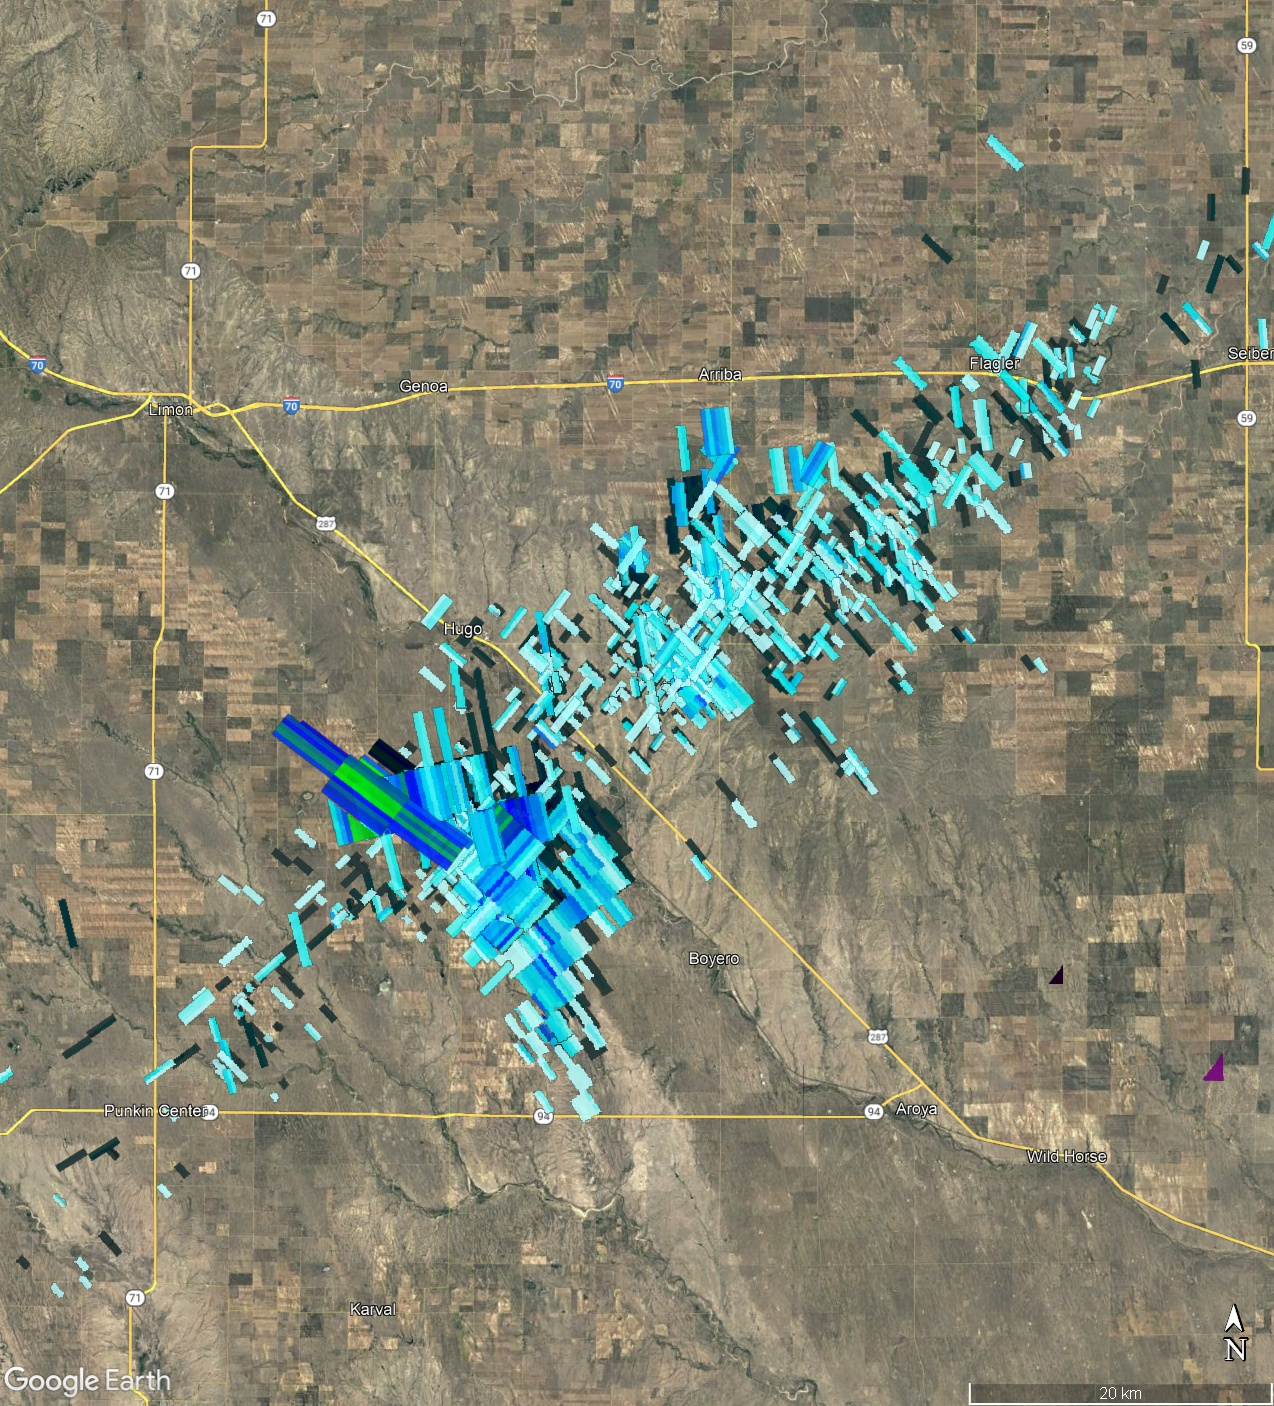 Composite view of radar signatures from the site with the strongest radar reflections.